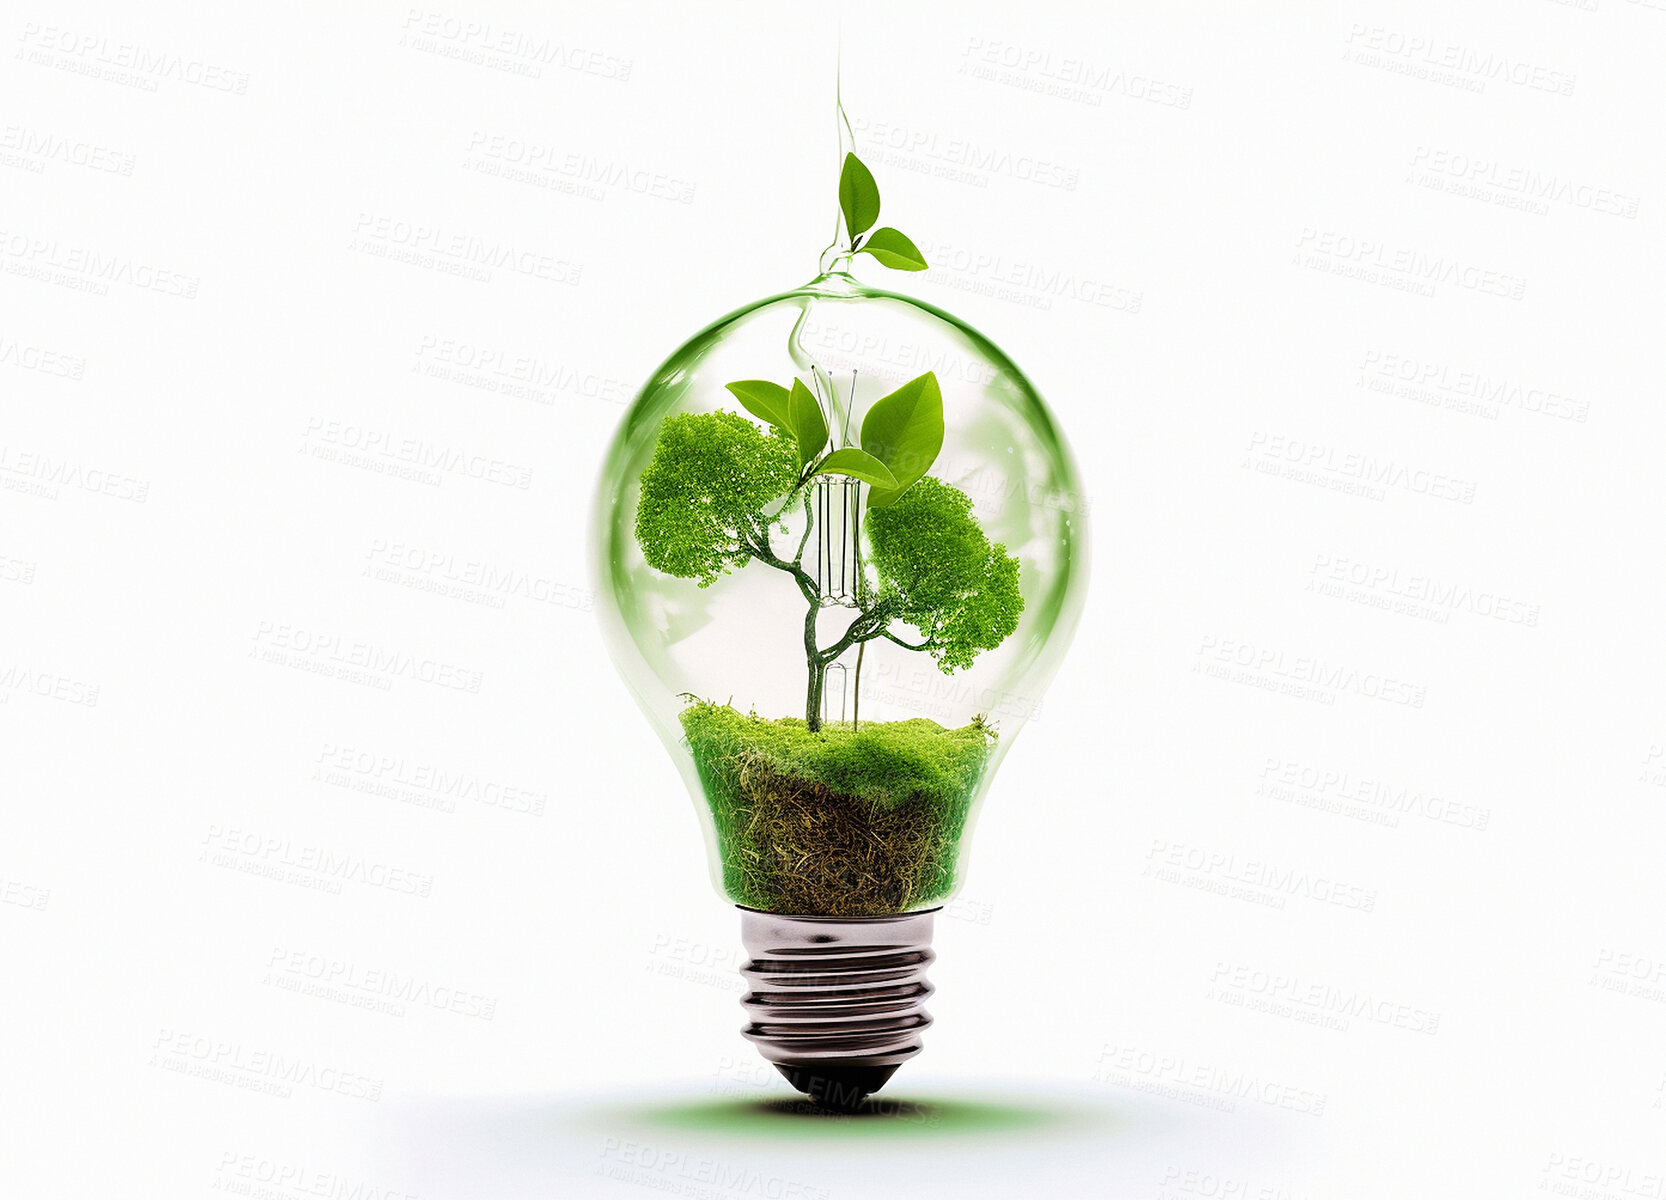 Buy stock photo Light bulb, plants or isolated growth in sustainability, green energy or ai generated recycling idea